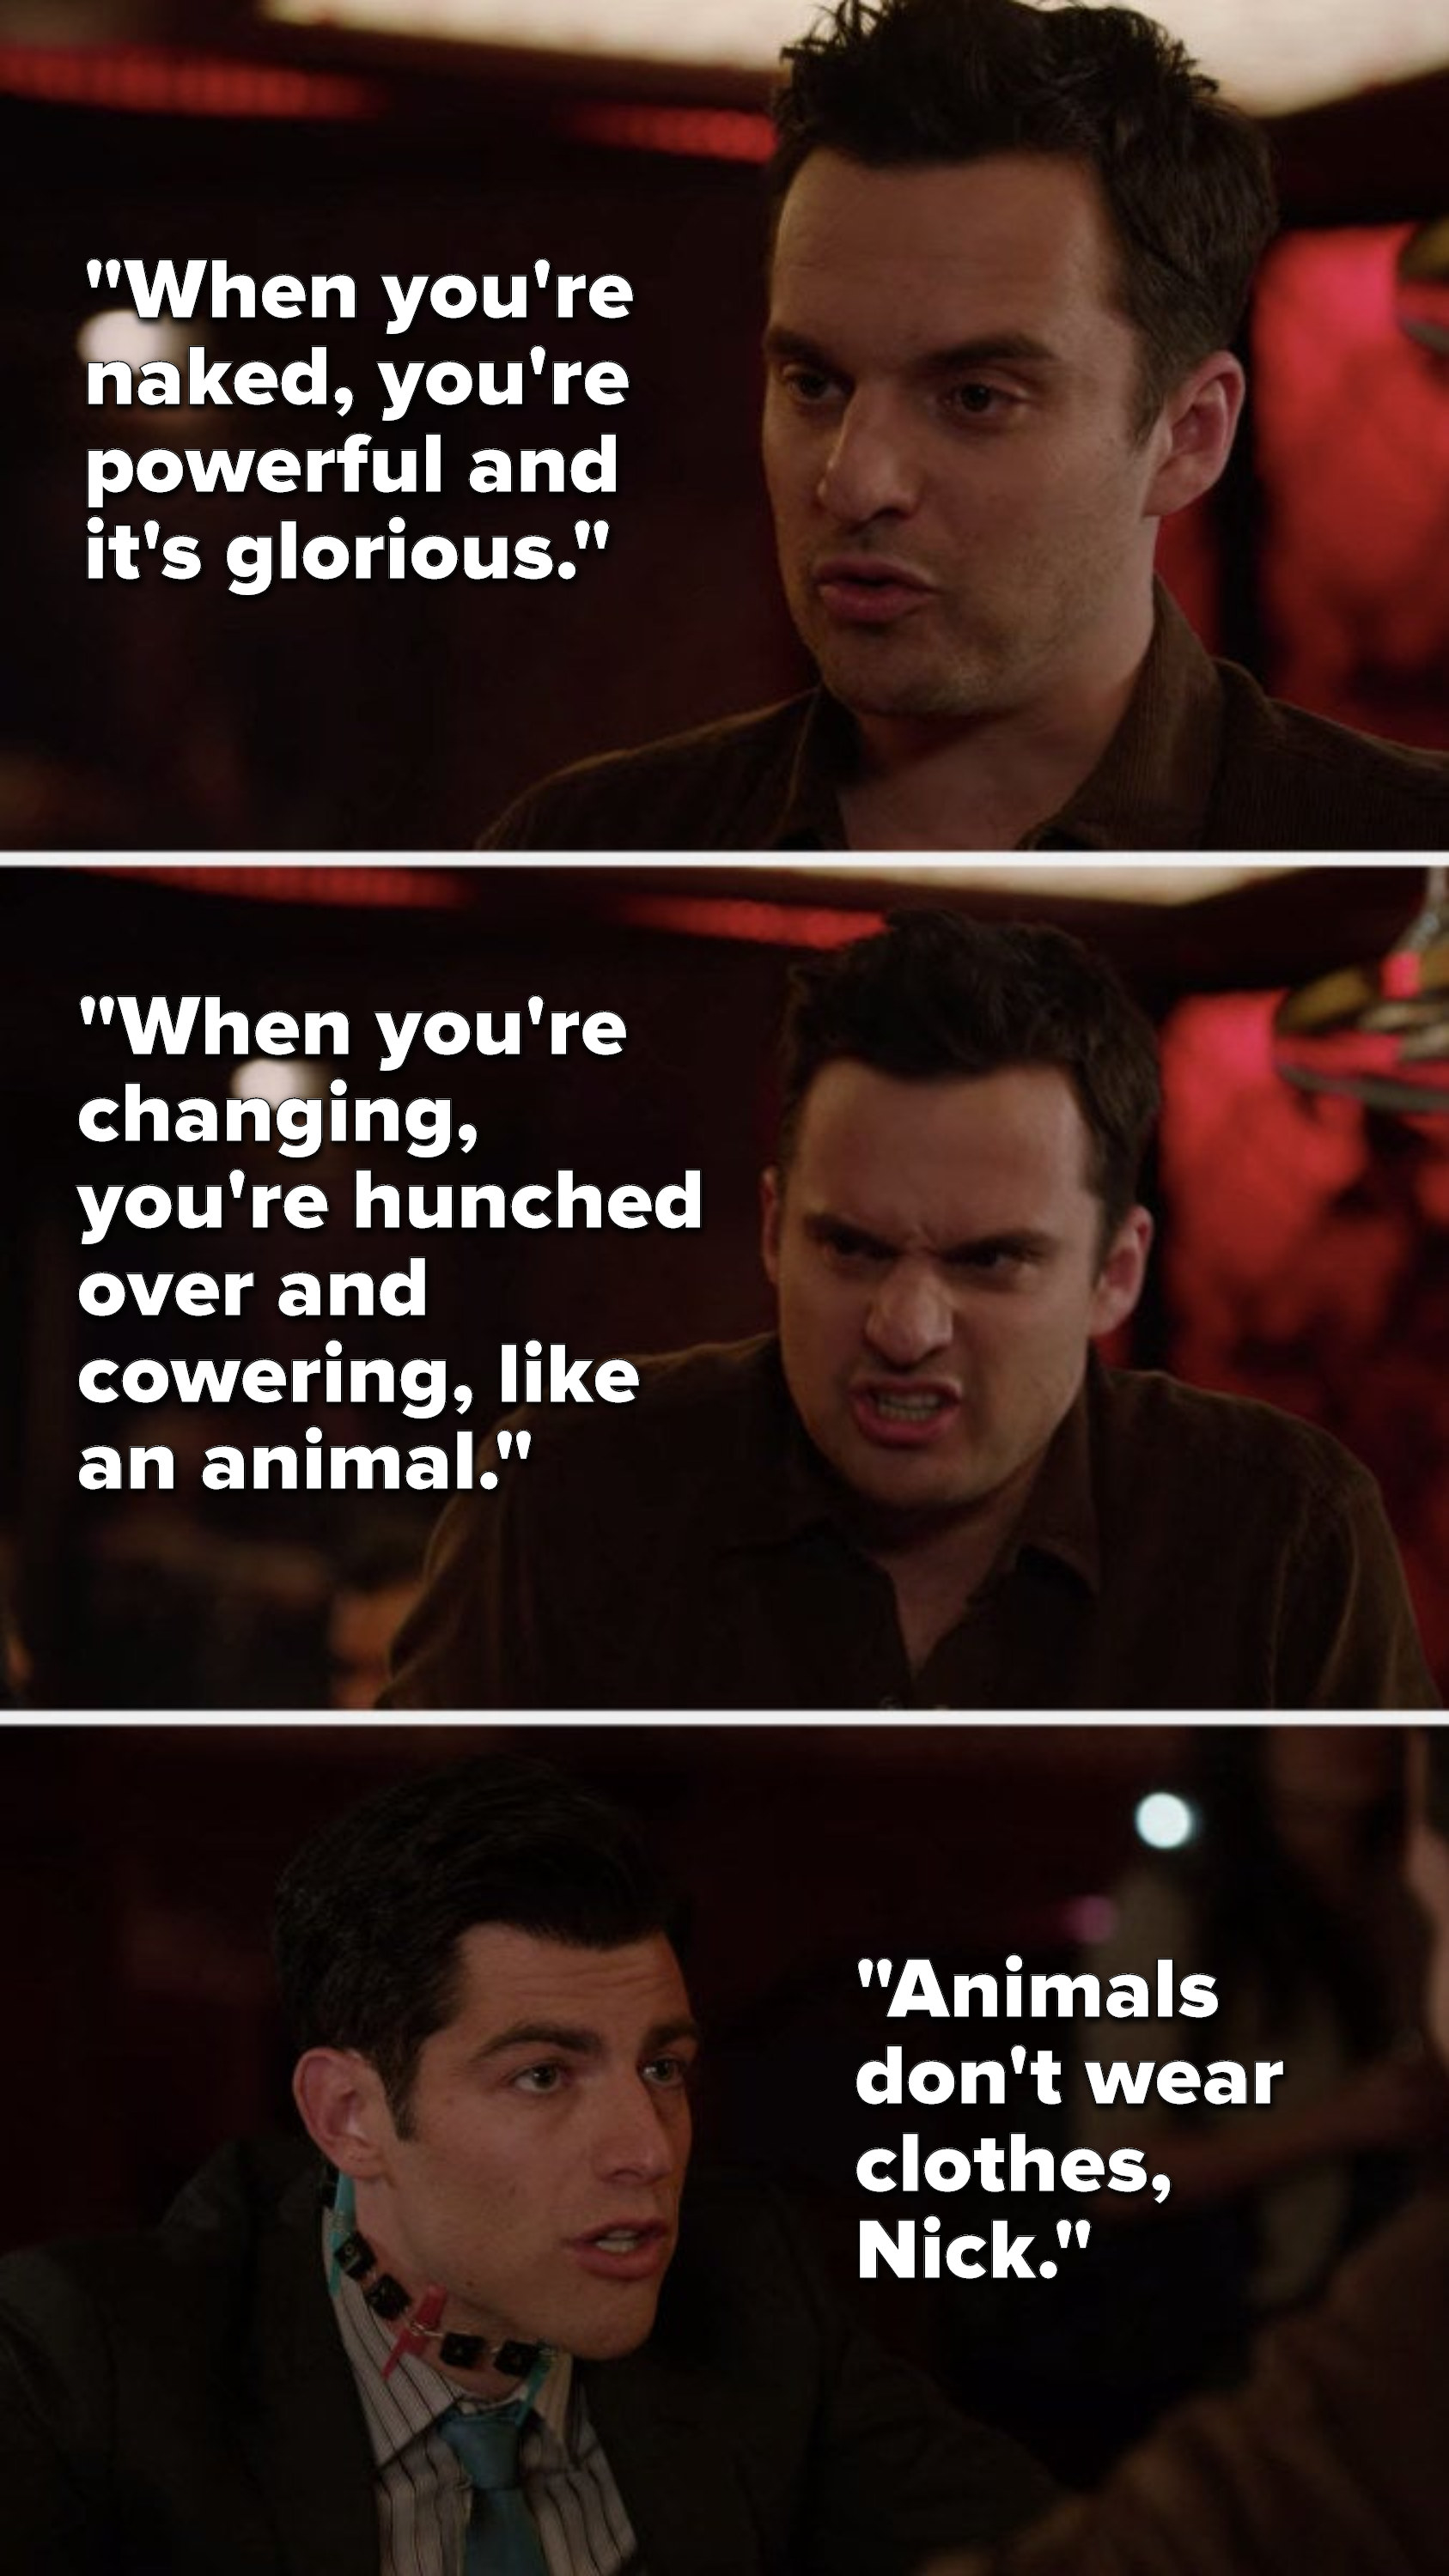 Nick says, &quot;When you&#x27;re naked, you&#x27;re powerful and it&#x27;s glorious, when you&#x27;re changing, you&#x27;re hunched over and cowering, like an animal,&quot; and Schmidt says, &quot;Animals don&#x27;t wear clothes, Nick&quot;